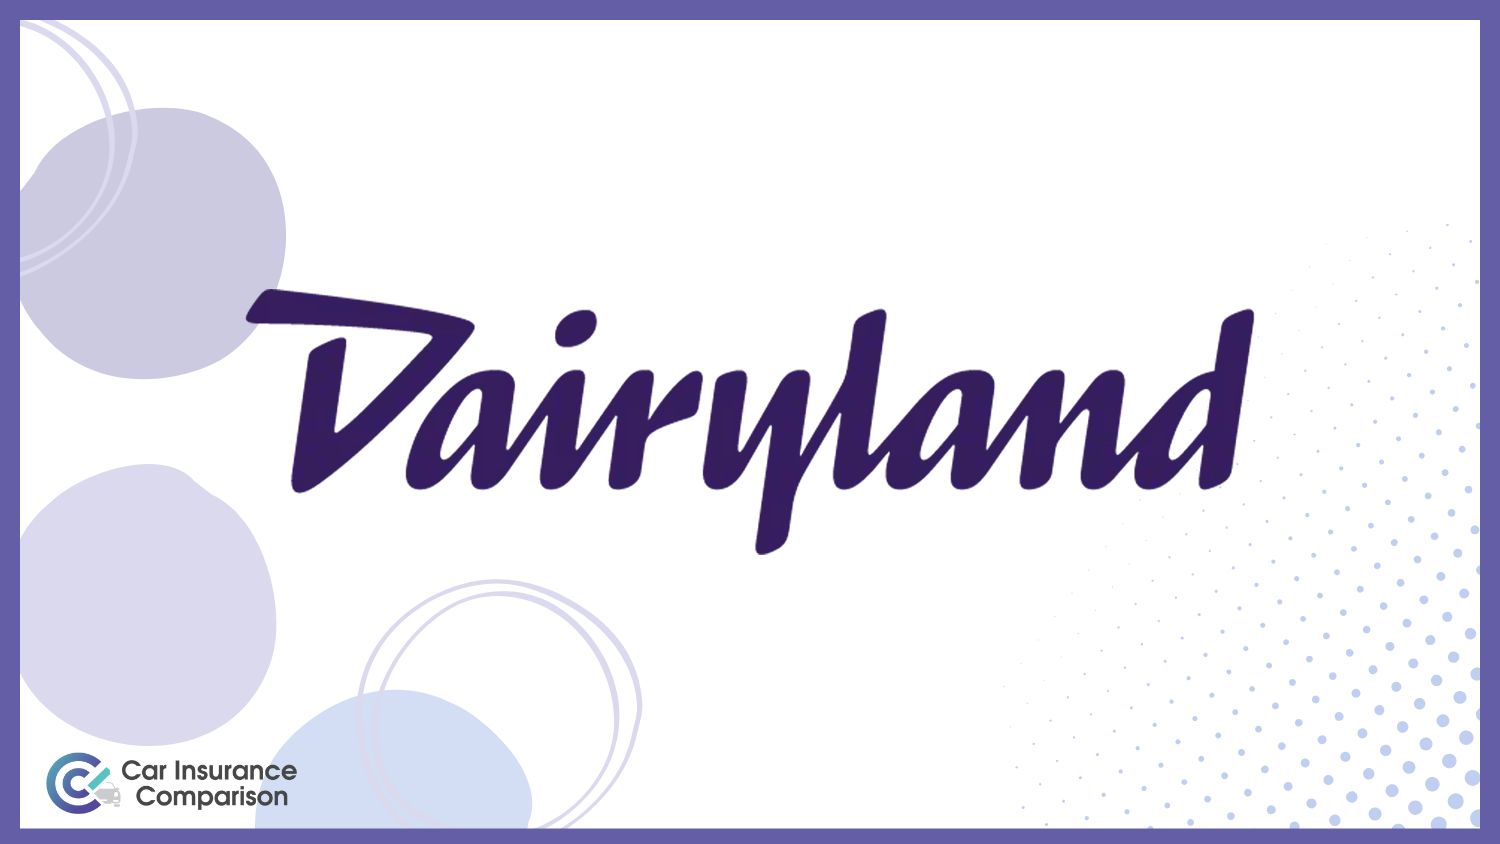 Dairyland: Compare Best Car Insurance Companies That Accept a Suspended License